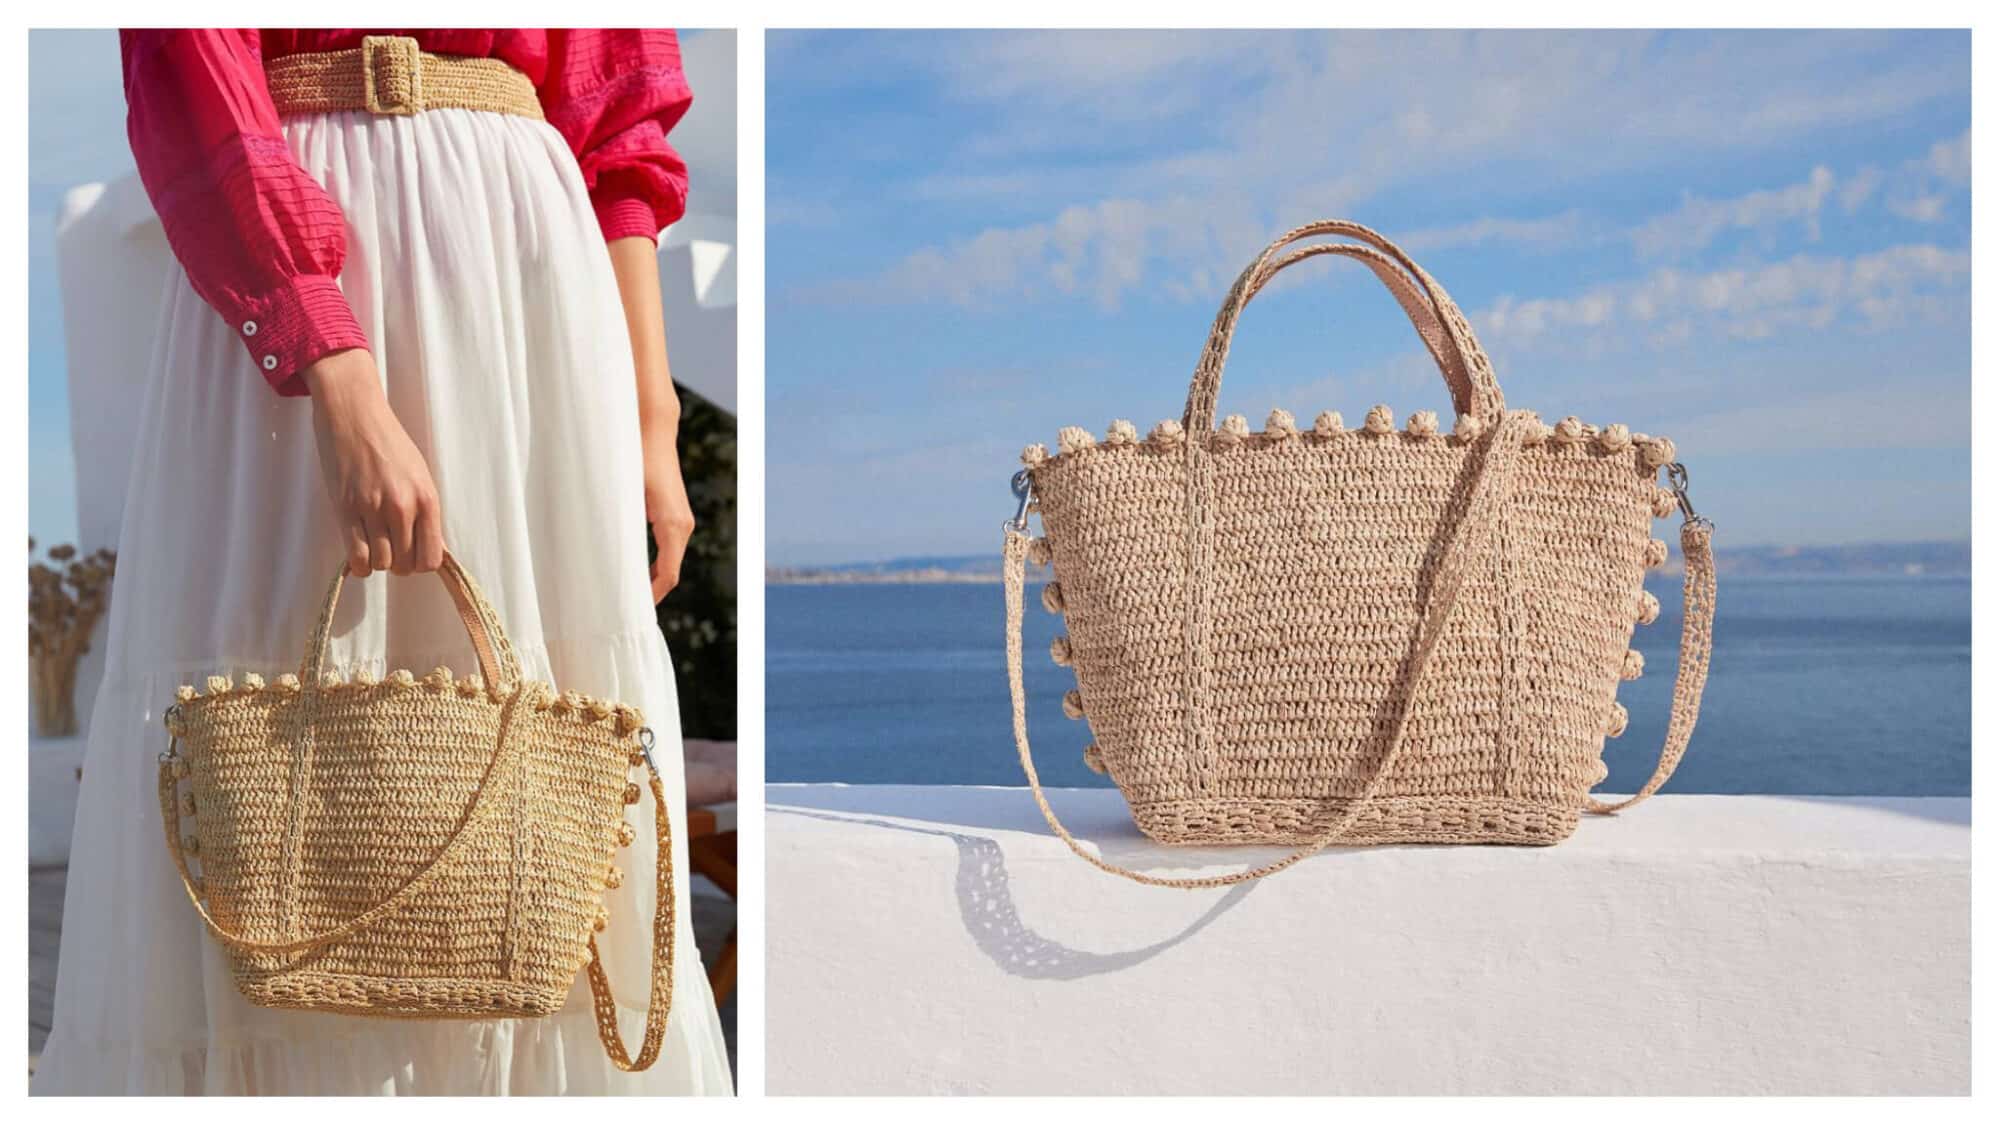 Left: A woman in a pink blouse and white skirt holds a summer handbag from Vanessa Bruno. Her wicker belt matches the material of the bag, Right: The same summer bag, pictured left, from Vanessa Bruno sits on a white ledge with blue ocean and sky in the background.